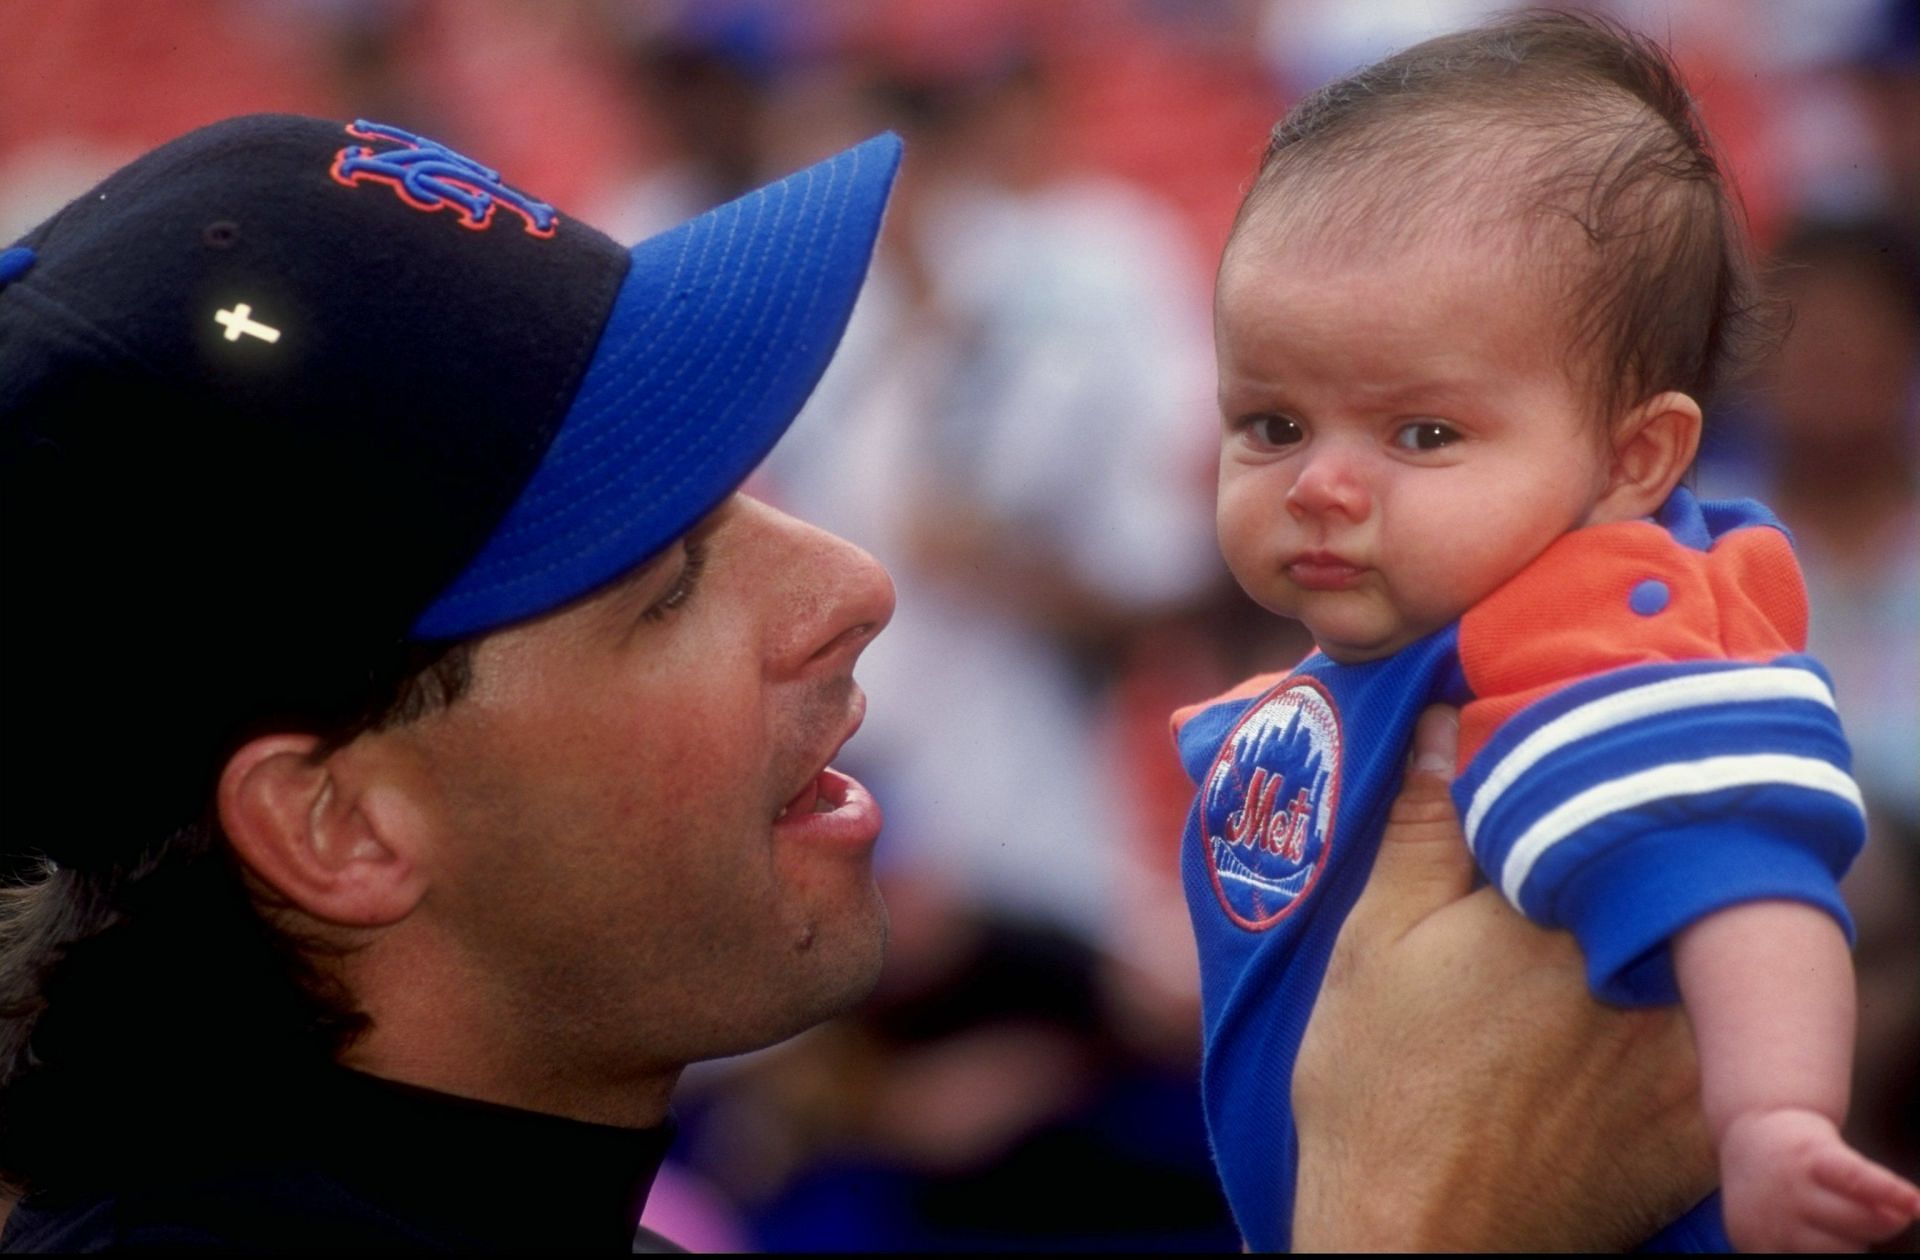 Pitcher Turk Wendell #99 of the New York Mets holds a baby prior to a game